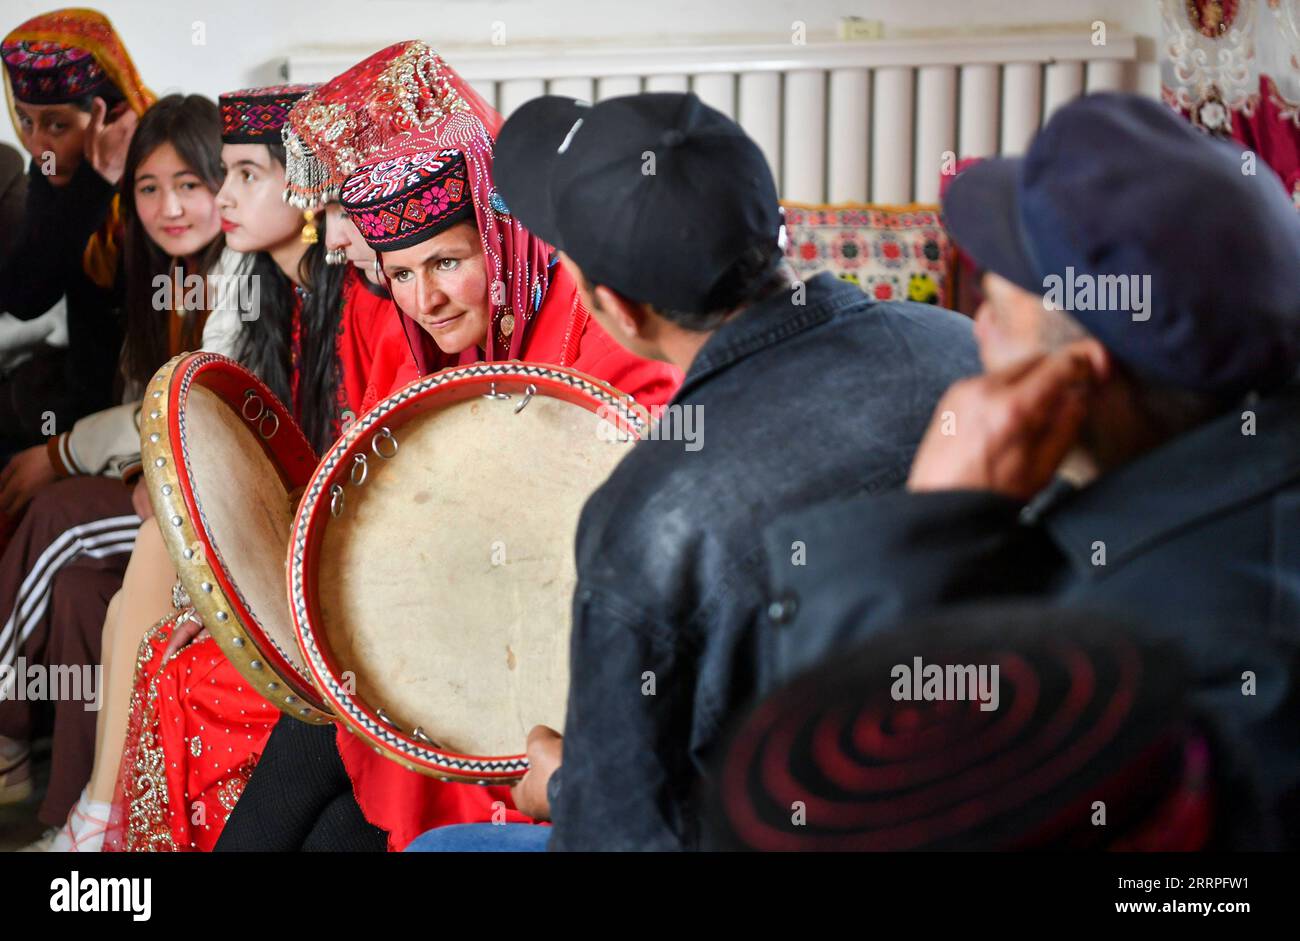 230322 -- TAXKORGAN, March 22, 2023 -- Relatives and friends of the bride Gulihan Jrbli play tambourines and sing at her home in Taxkorgan Tajik Autonomous County, northwest China s Xinjiang Uygur Autonomous Region, March 18, 2023. In Taxkorgan Tajik Autonomous County, many young men and women prefer to get married in the spring season. Recently in Fumin Village, 25-year-old Gulihan Jrbli and her groom Mairmaitih Tirmur held a wedding after falling in love for more than three years. The ceremony was conducted according to traditional Tajik wedding custom, with relatives, friends and villagers Stock Photo